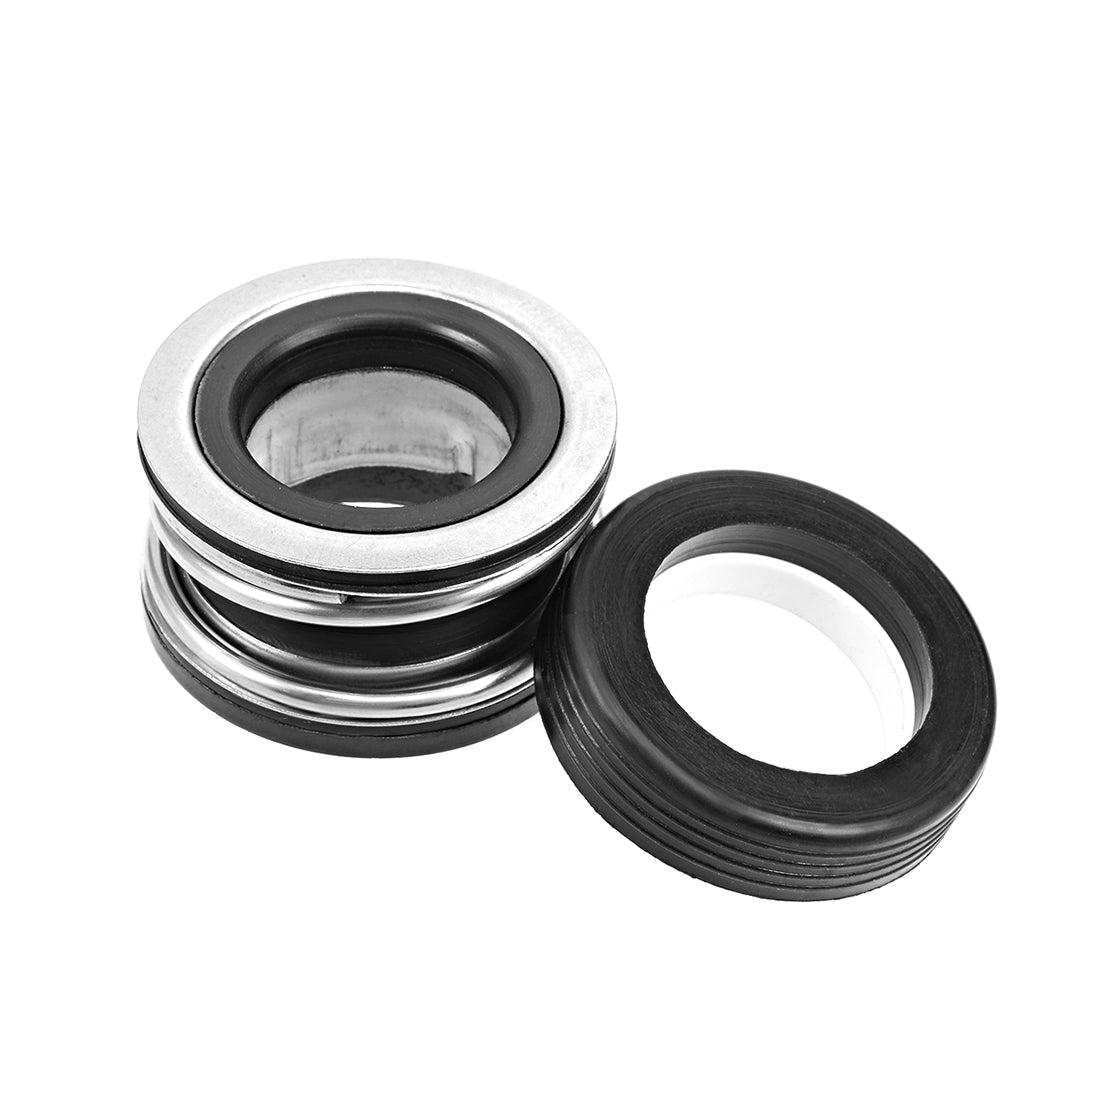 uxcell Uxcell Mechanical Shaft Seal Replacement for Pool Spa Pump 2pcs XJ-25